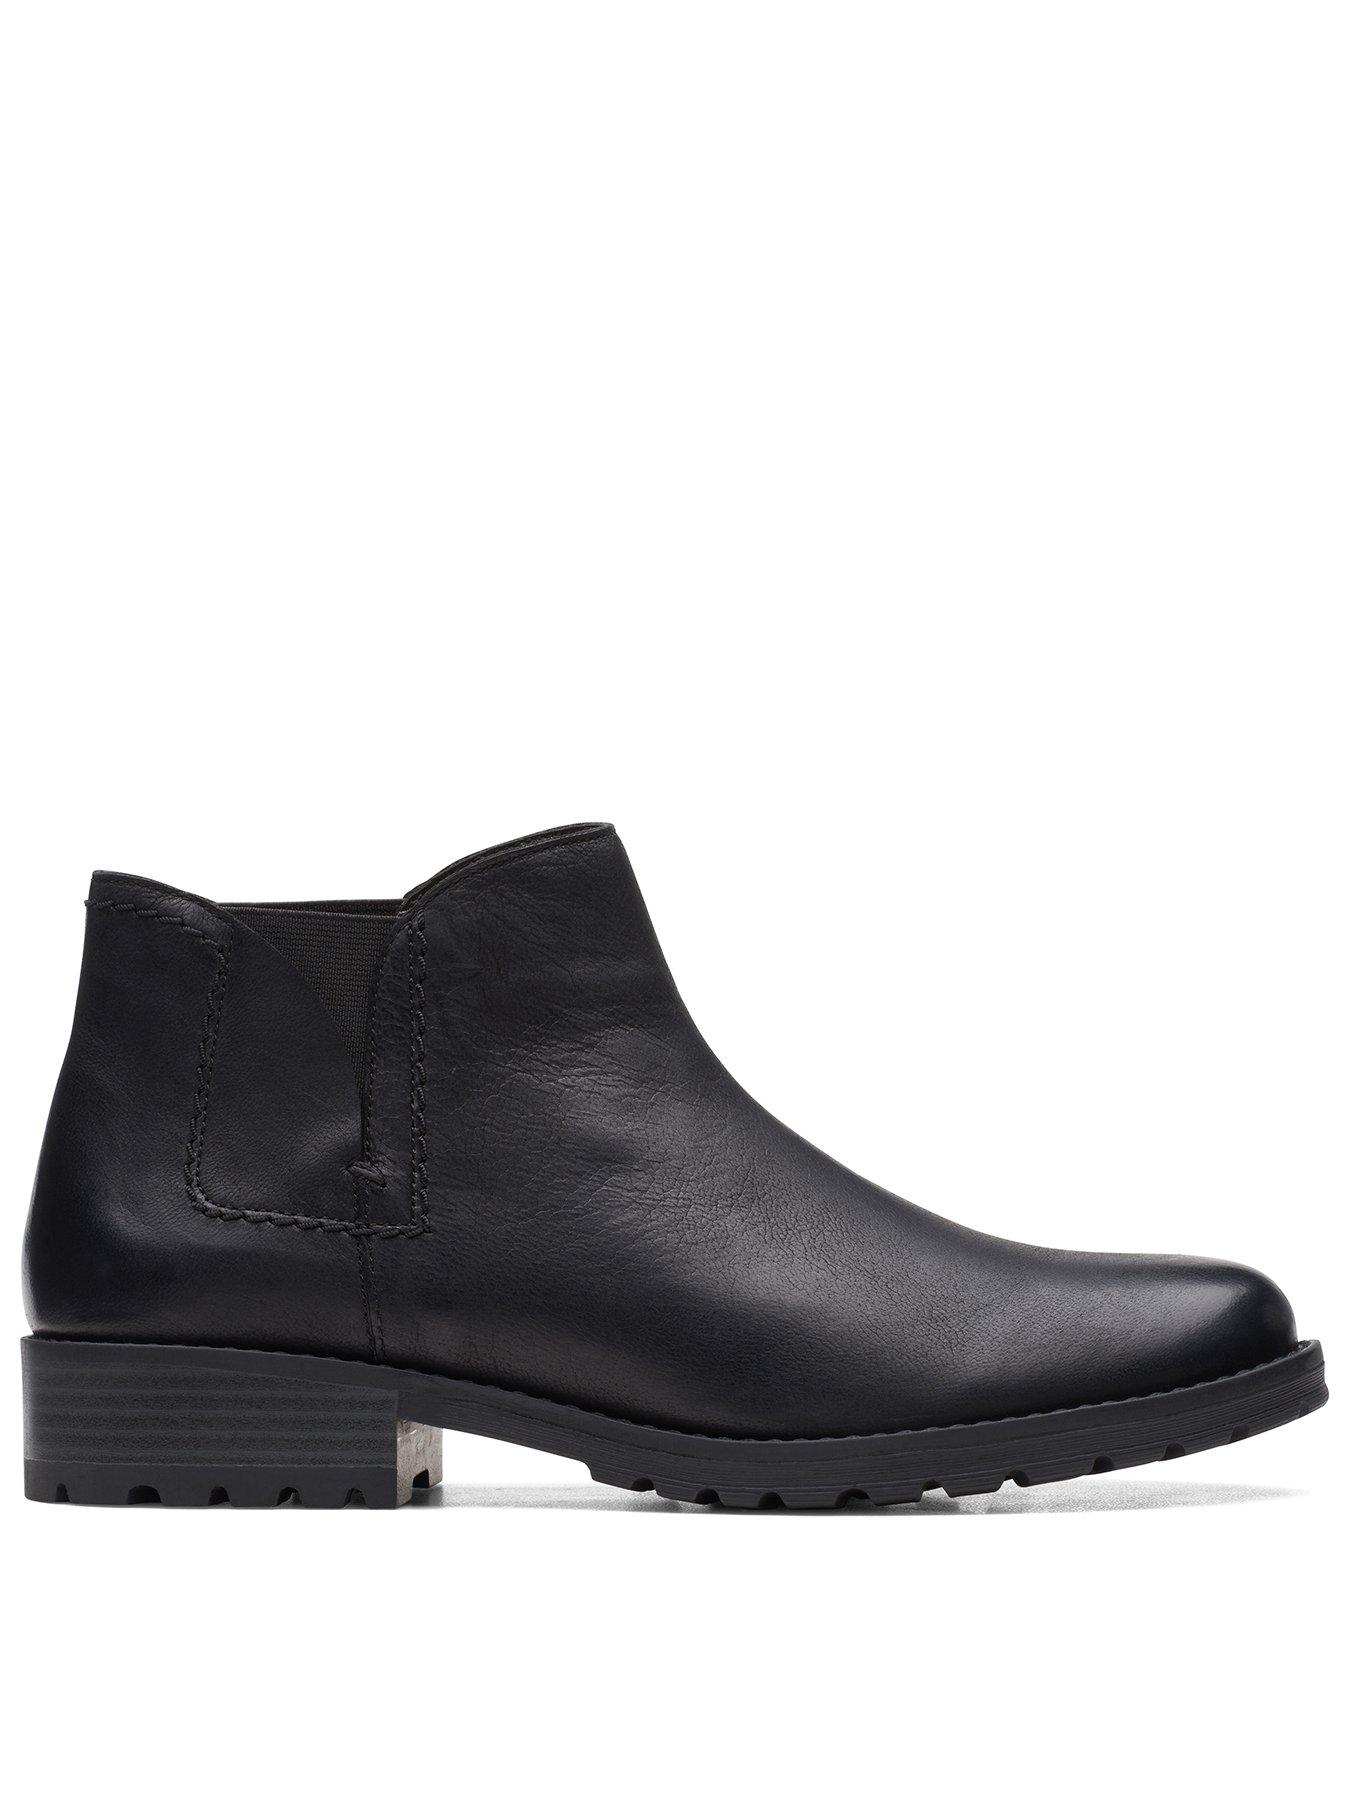 Clarks Shoes | Sale | Very Online